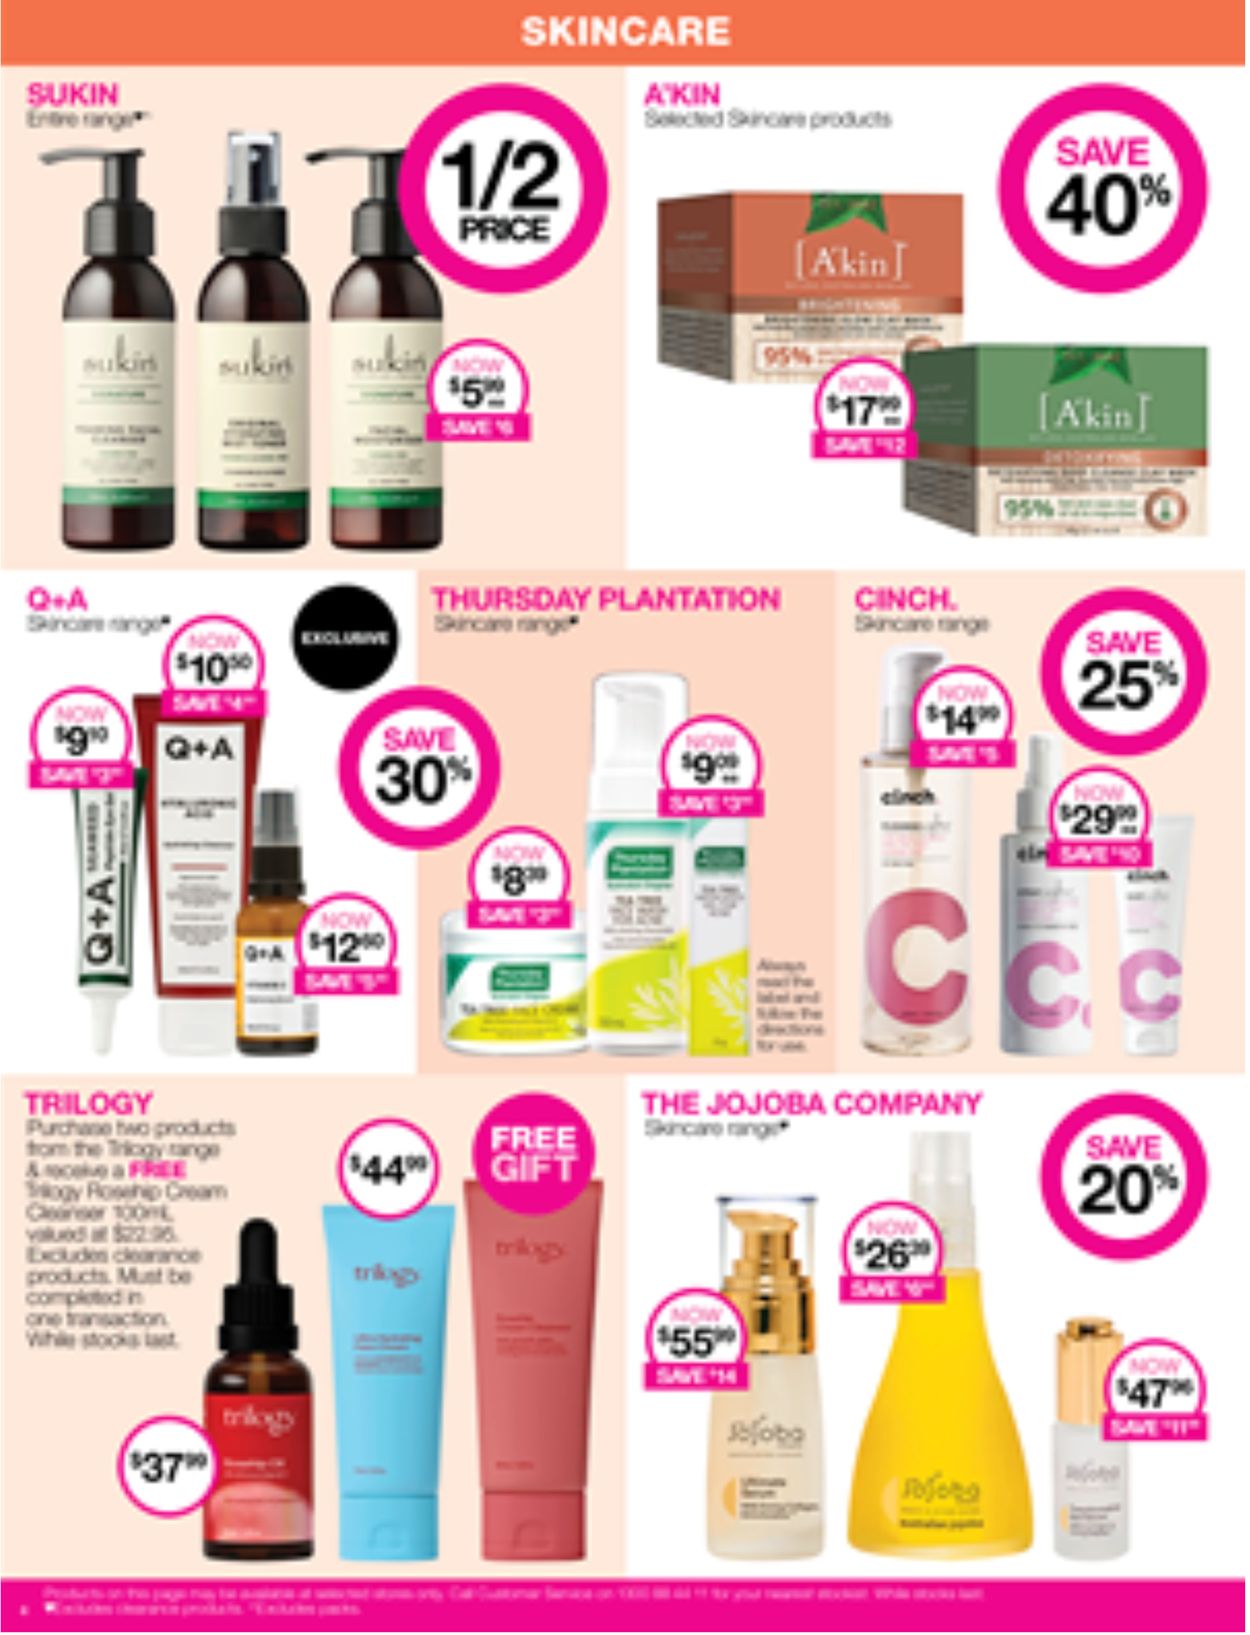 Priceline Pharmacy Catalogue from 20/05/2022